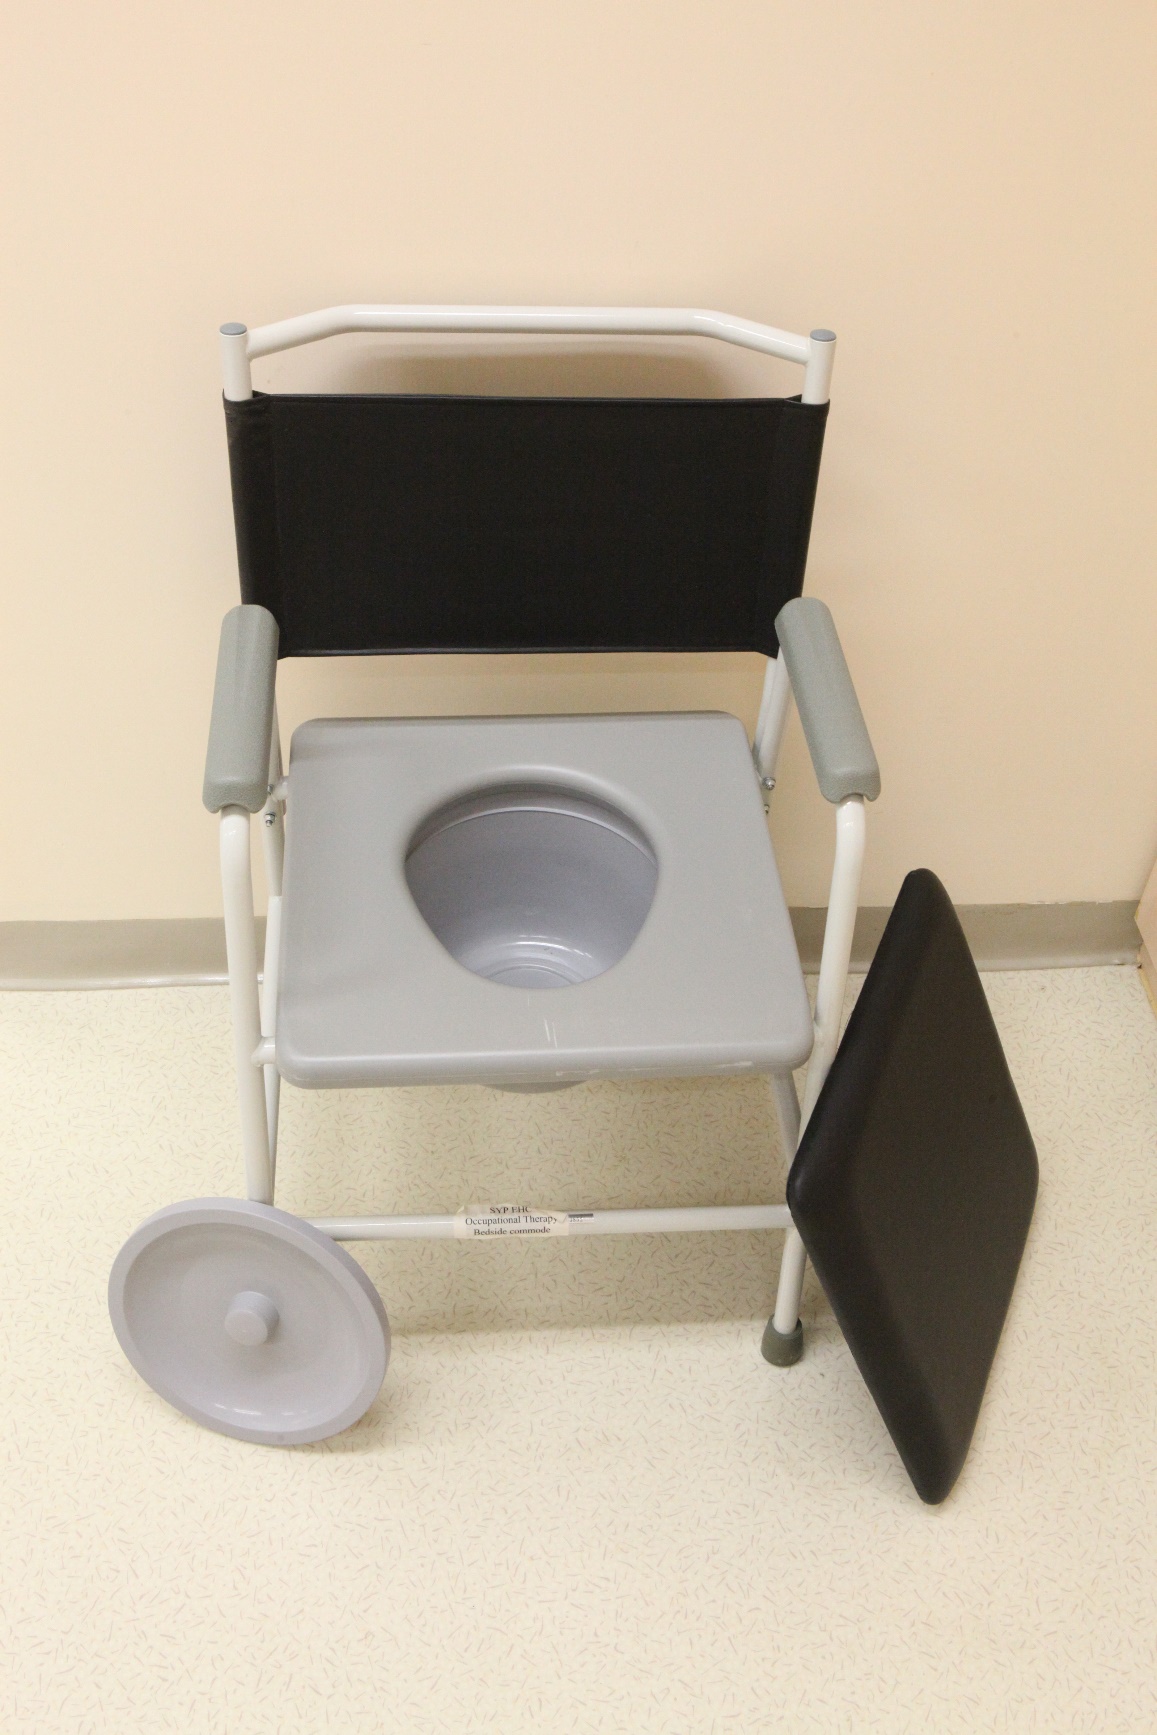 The diagram shows a stationary commode chair with a removable lid next to it.  After removing the lid, there is a toilet seat and a plastic bucket that can be pulled out for easy cleansing. 